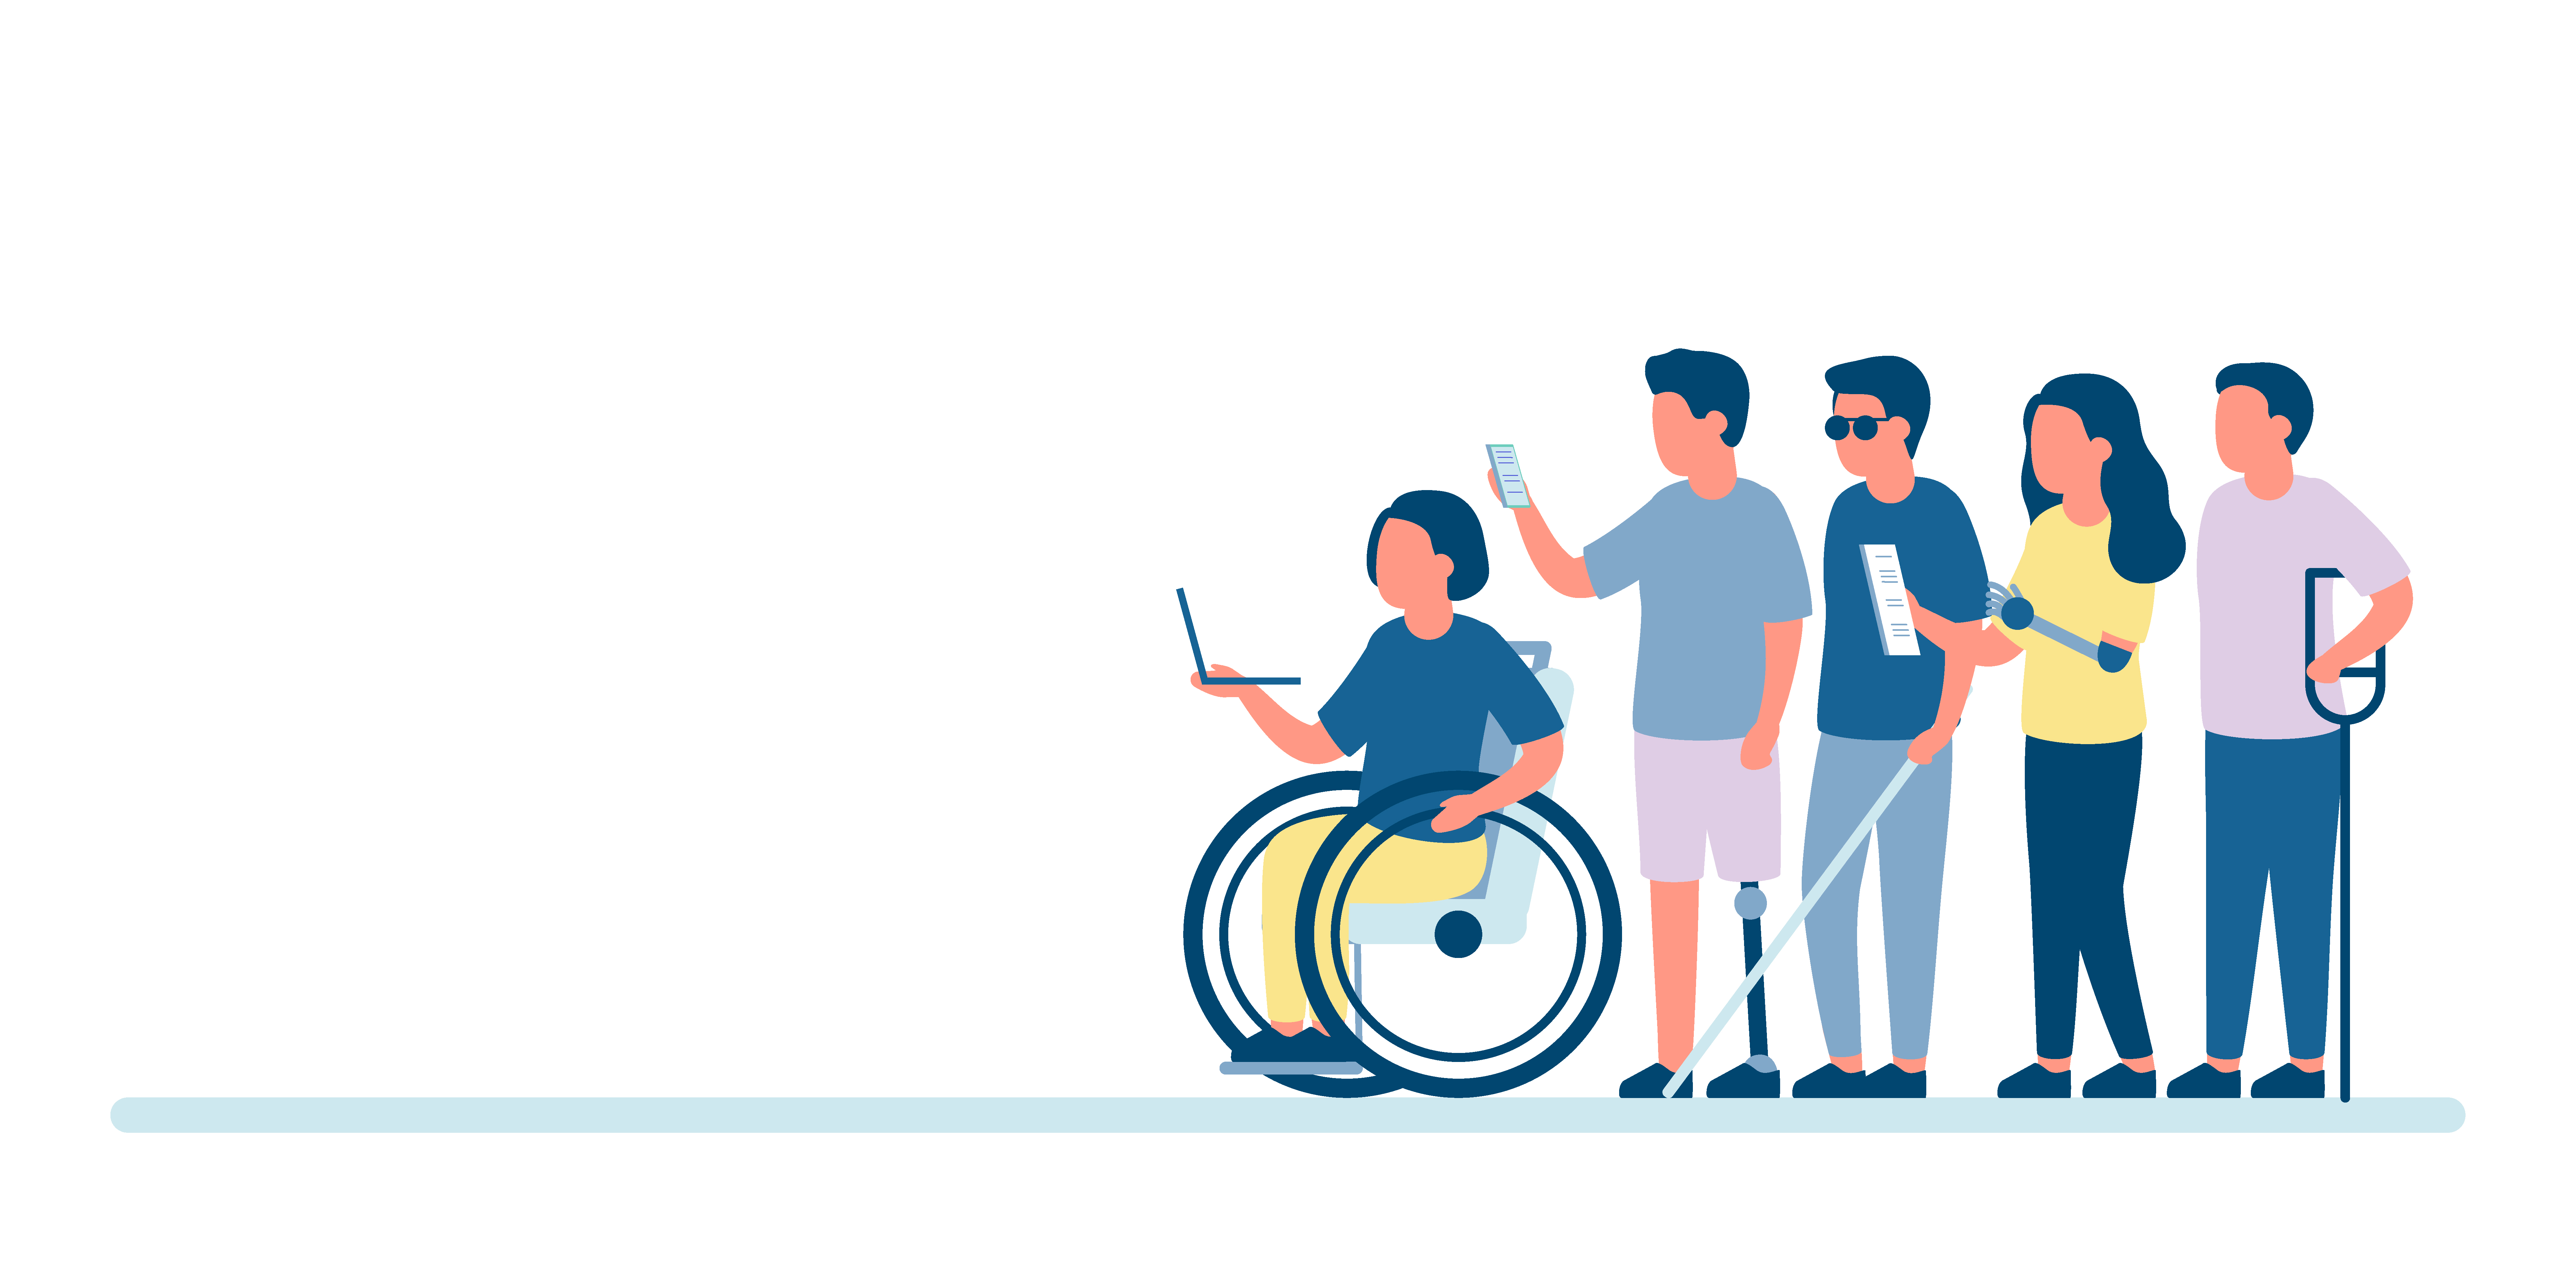 Illustration of people with different accessibility requirements looking at digital devices